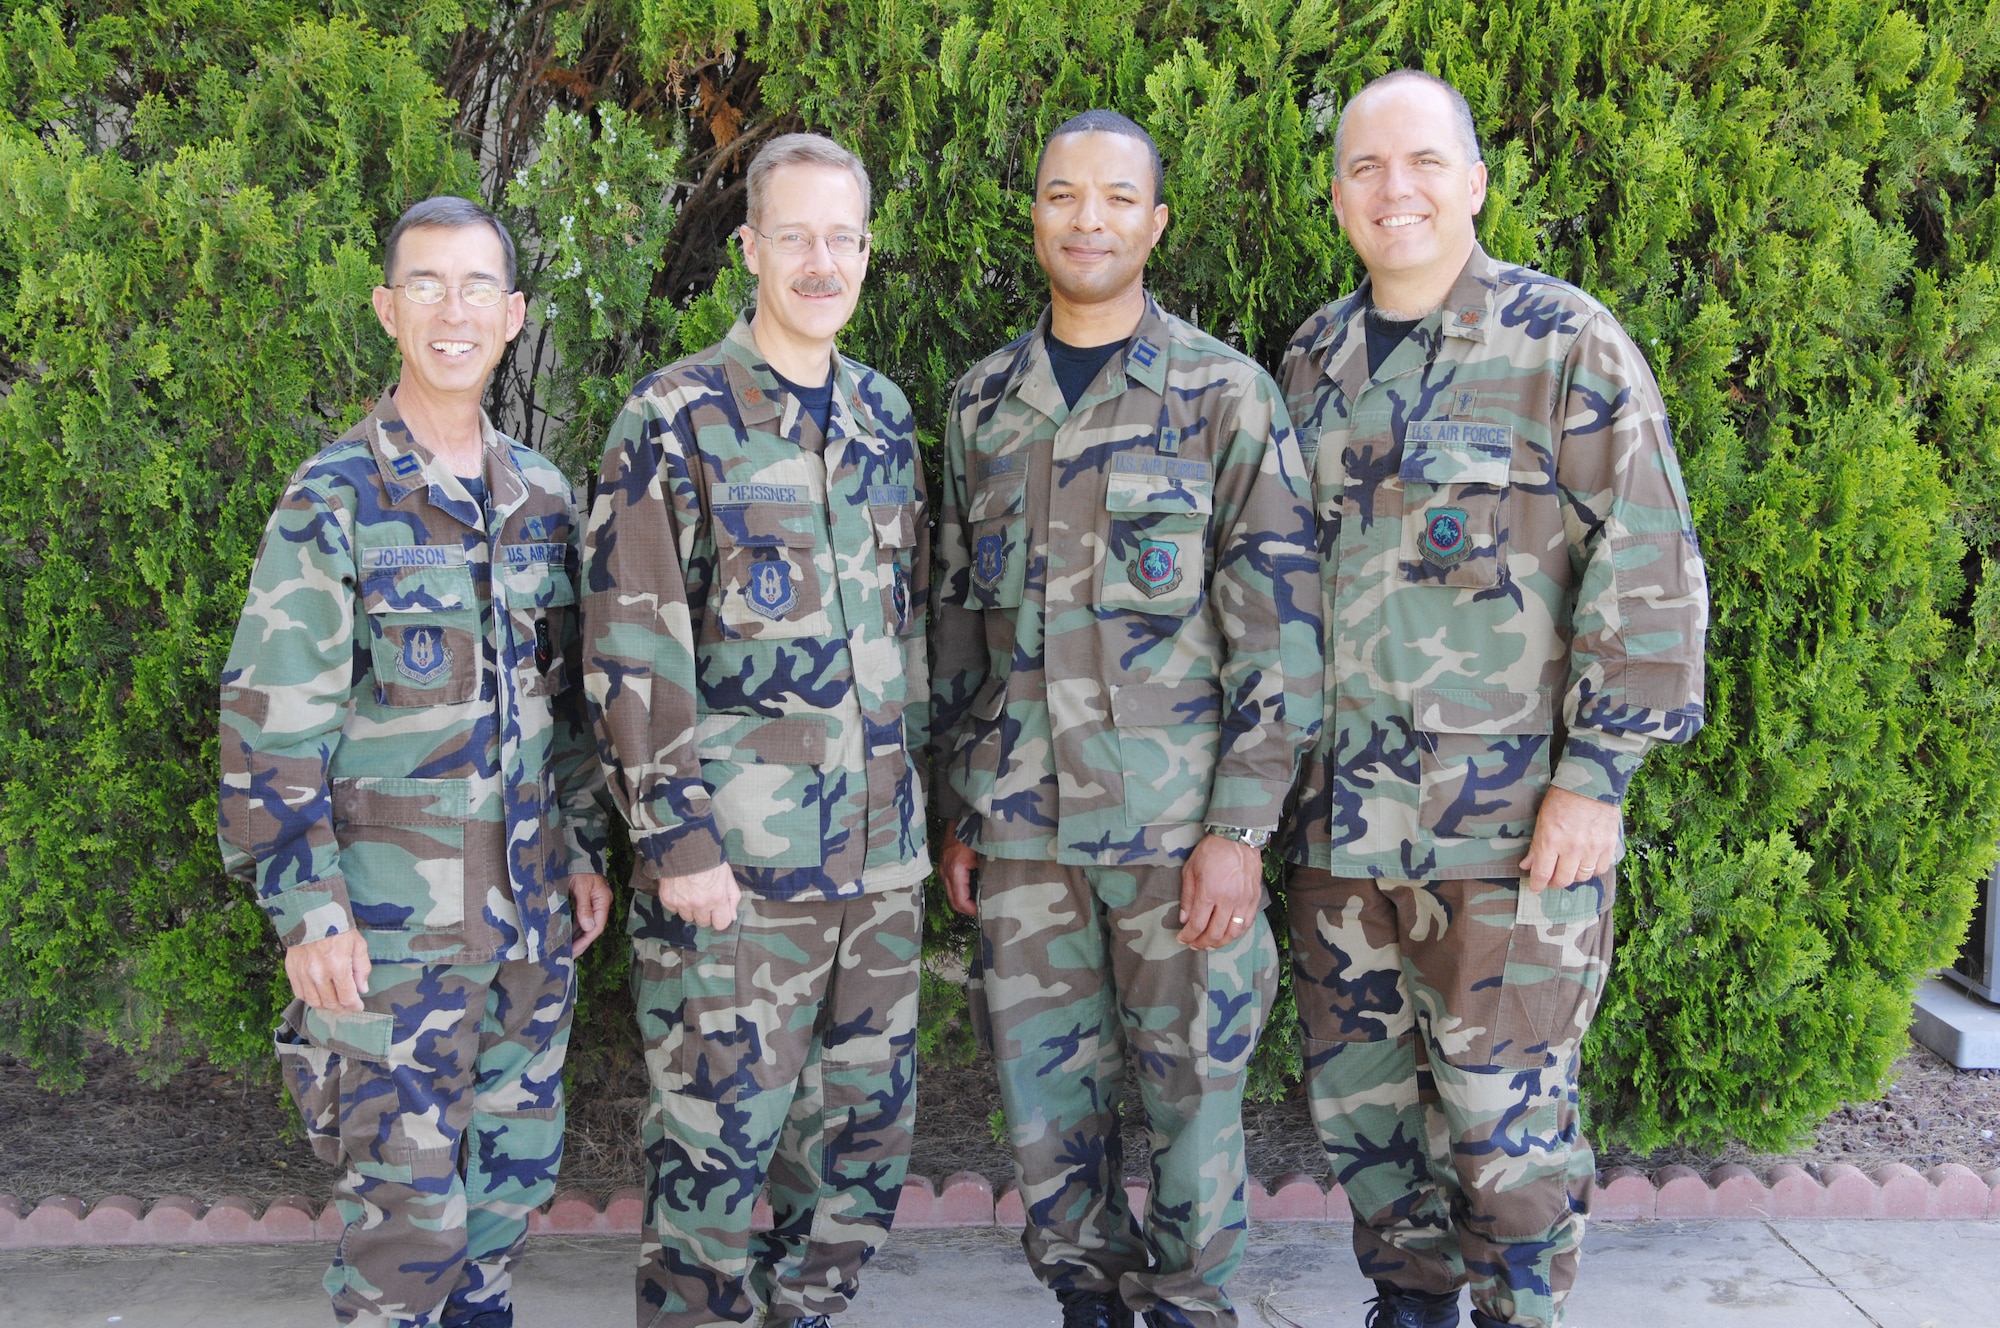 Chaplains of the 452 AMW/HC (left to right) are: Maj. Doug Johnson (recently promoted), Maj. Bob Meissner, Capt. Ken Walden and Maj. Rick Givens. (U.S. Air Force photo)